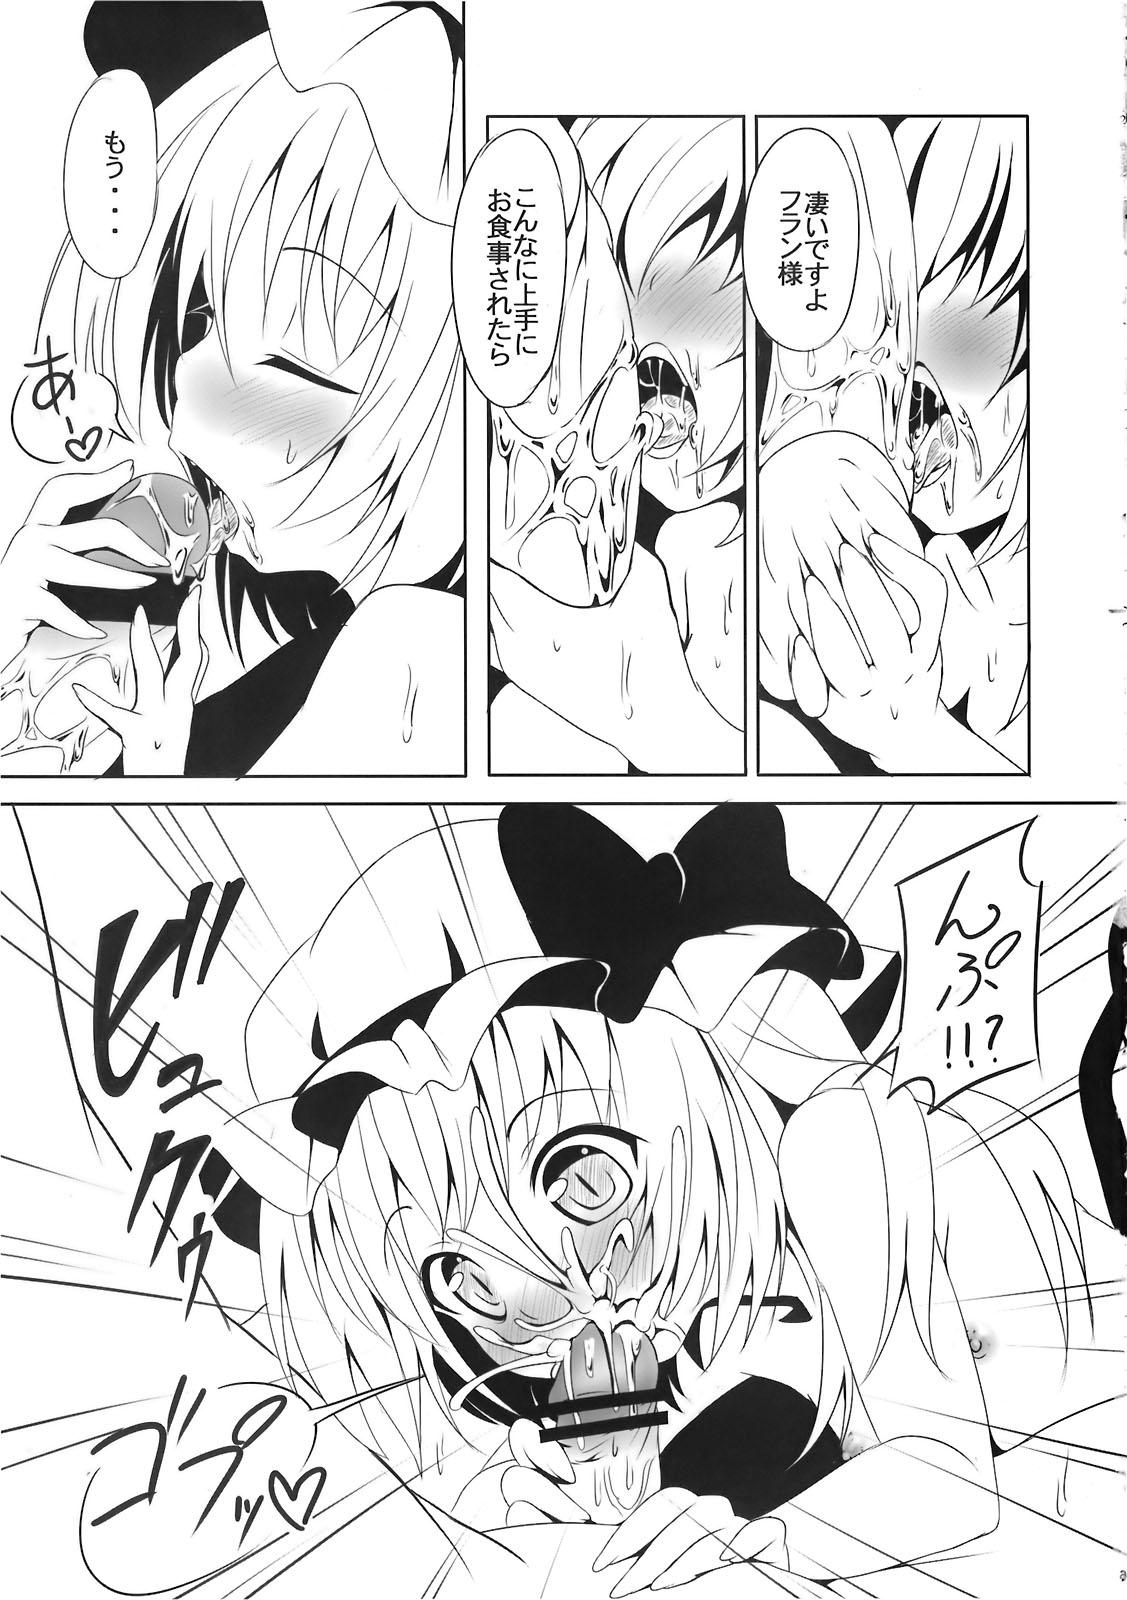 Oralsex franfran - Touhou project Mms - Page 7